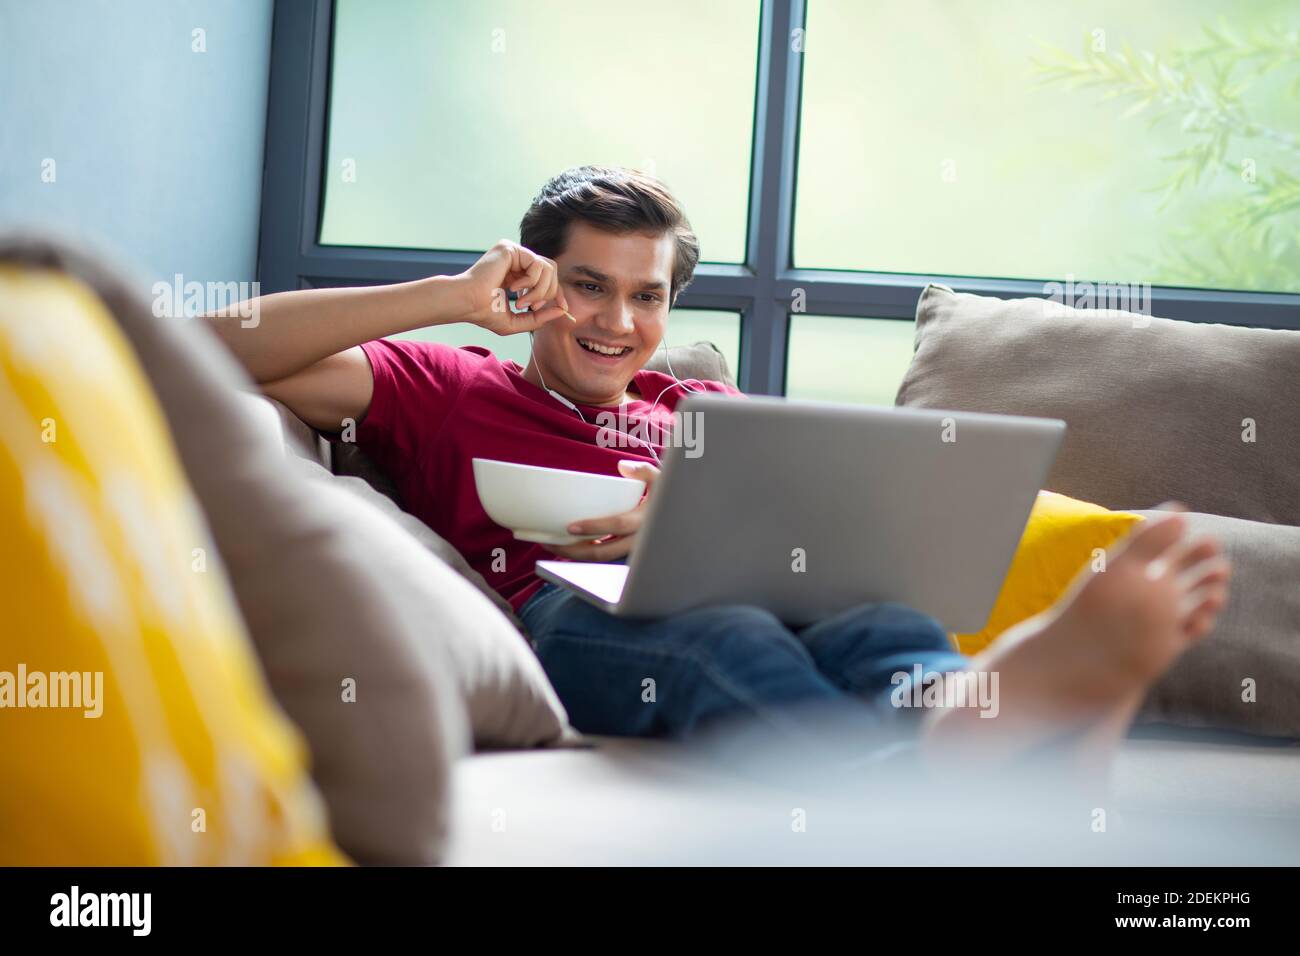 YOUNG MAN EATING CHIPS FROM A BOWL IN HIS HAND WHILE WATCHING A MOVIE ON HIS LAPTOP Stock Photo